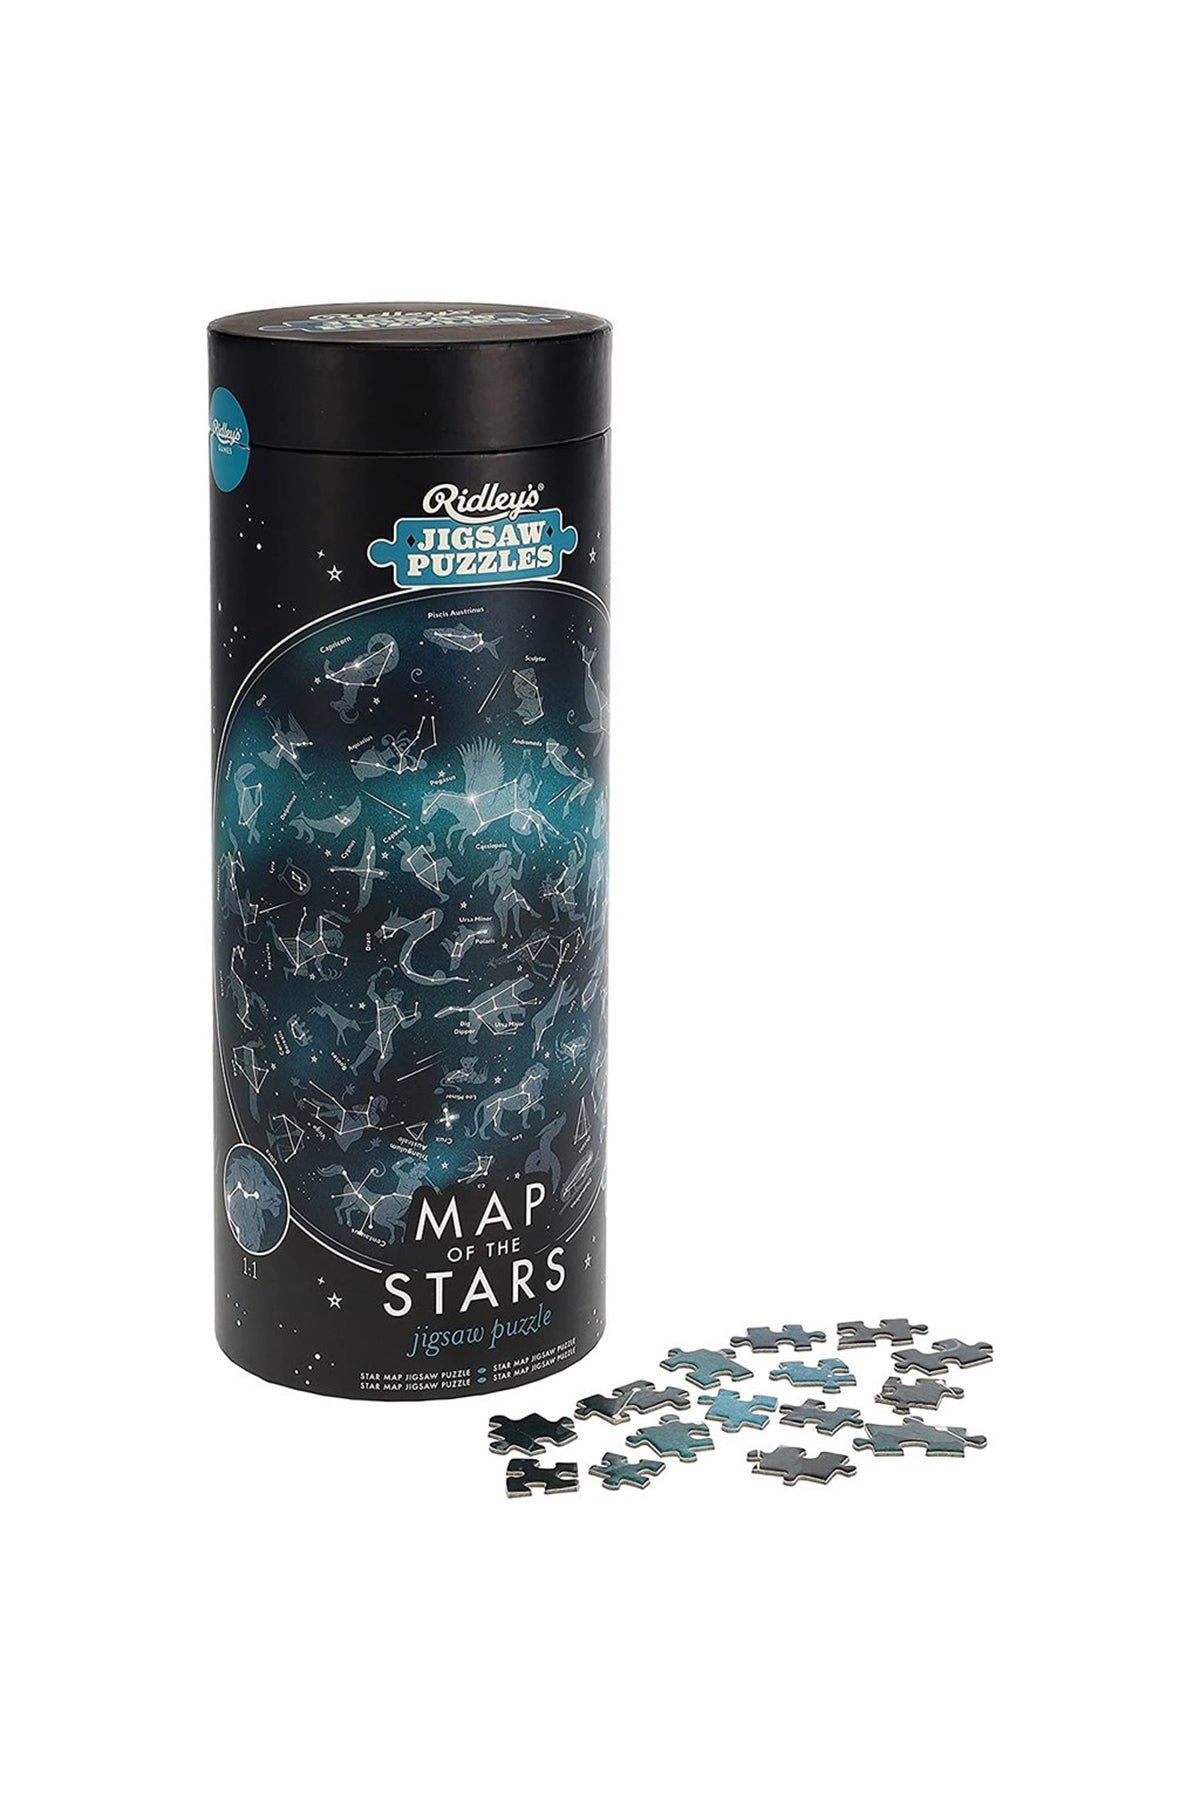 CHRONICLE | MAP OF THE STARS 1000 PIECE JIGSAW PUZZLE